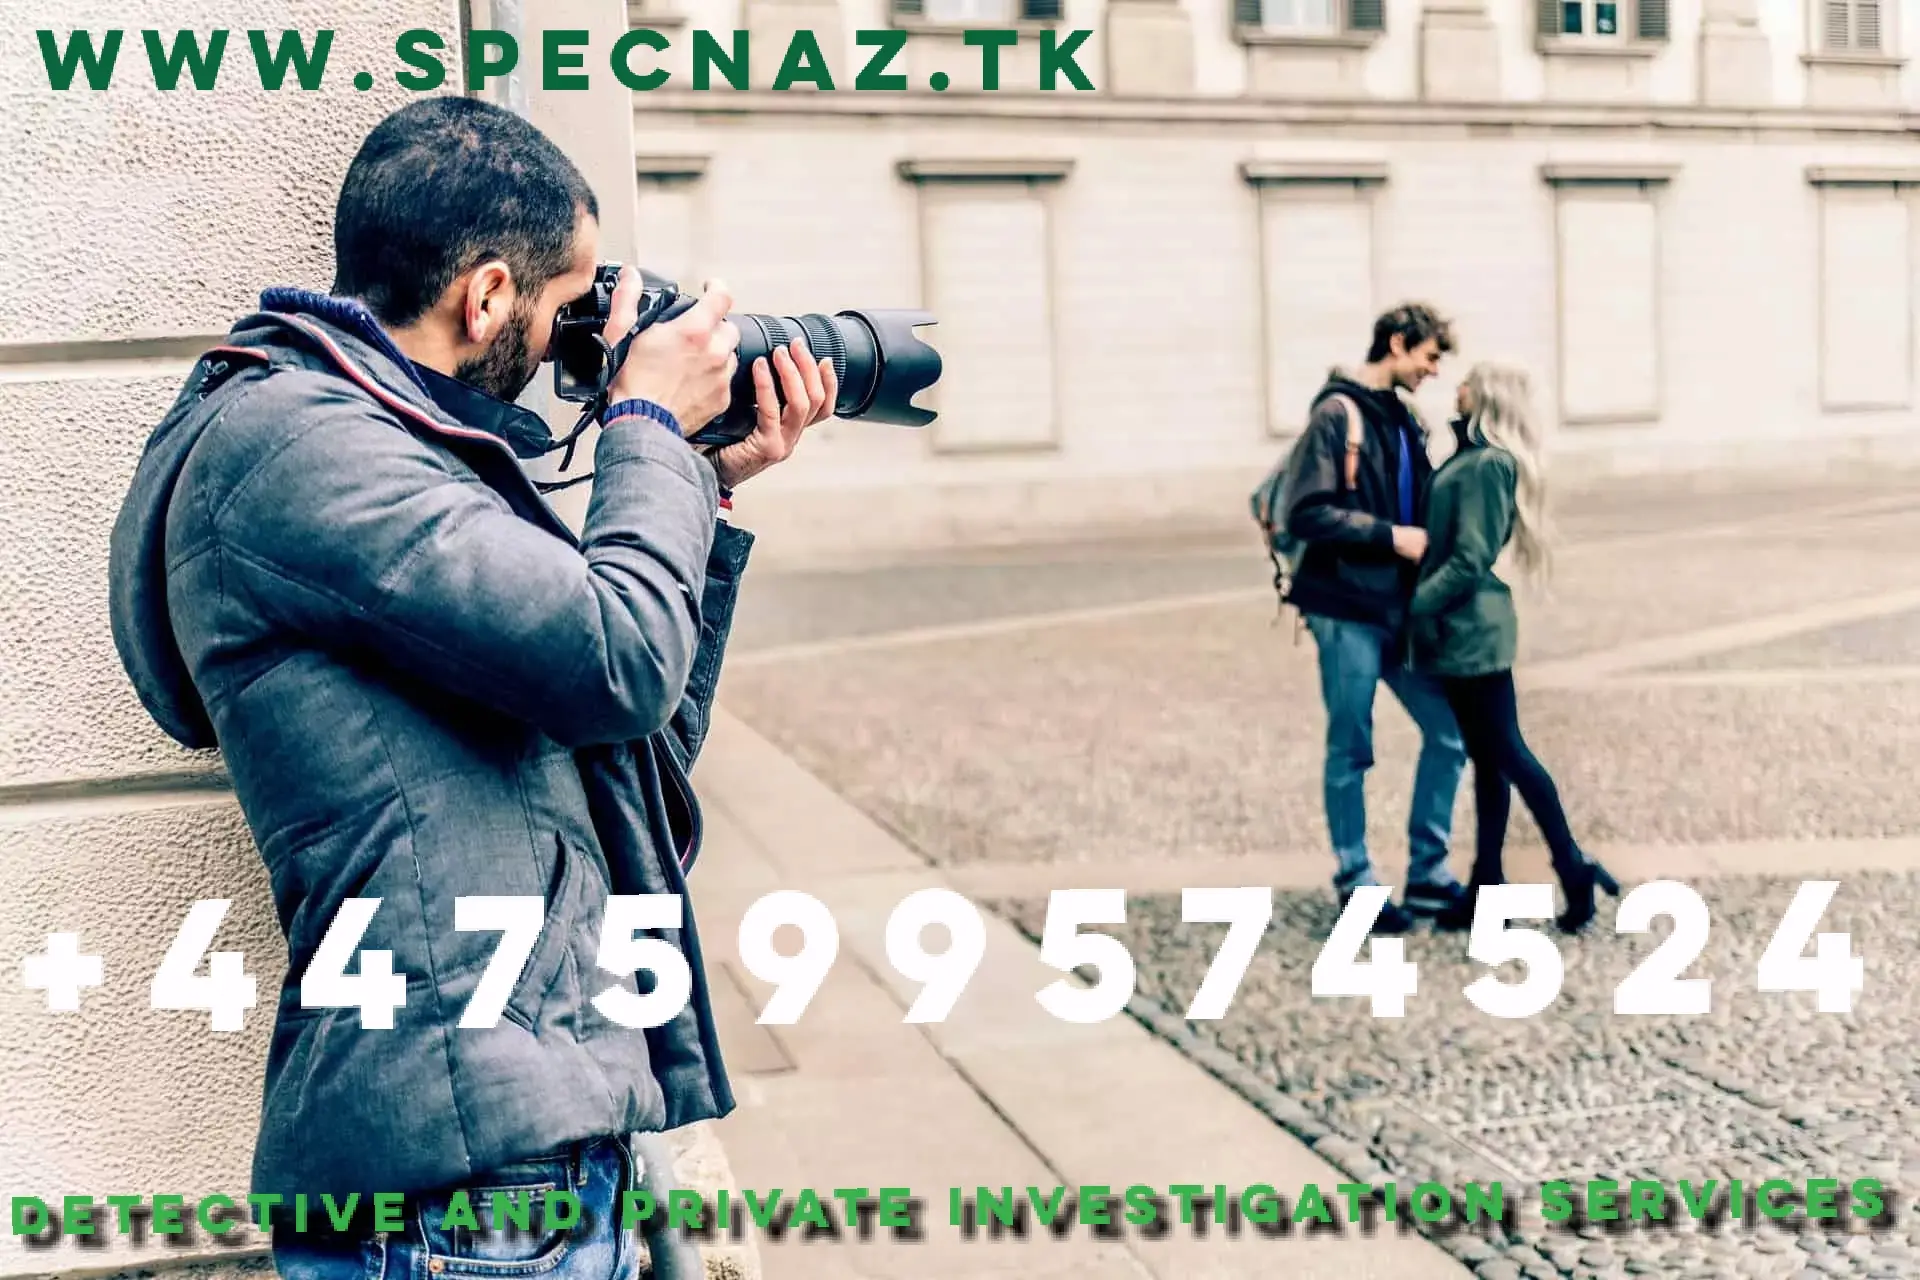 London UK Trustworthy Private Investigator Services:| Costs/ Fees. | Discreet, reliable and affordable Private Detective London | Hire Detective Agency Services UK